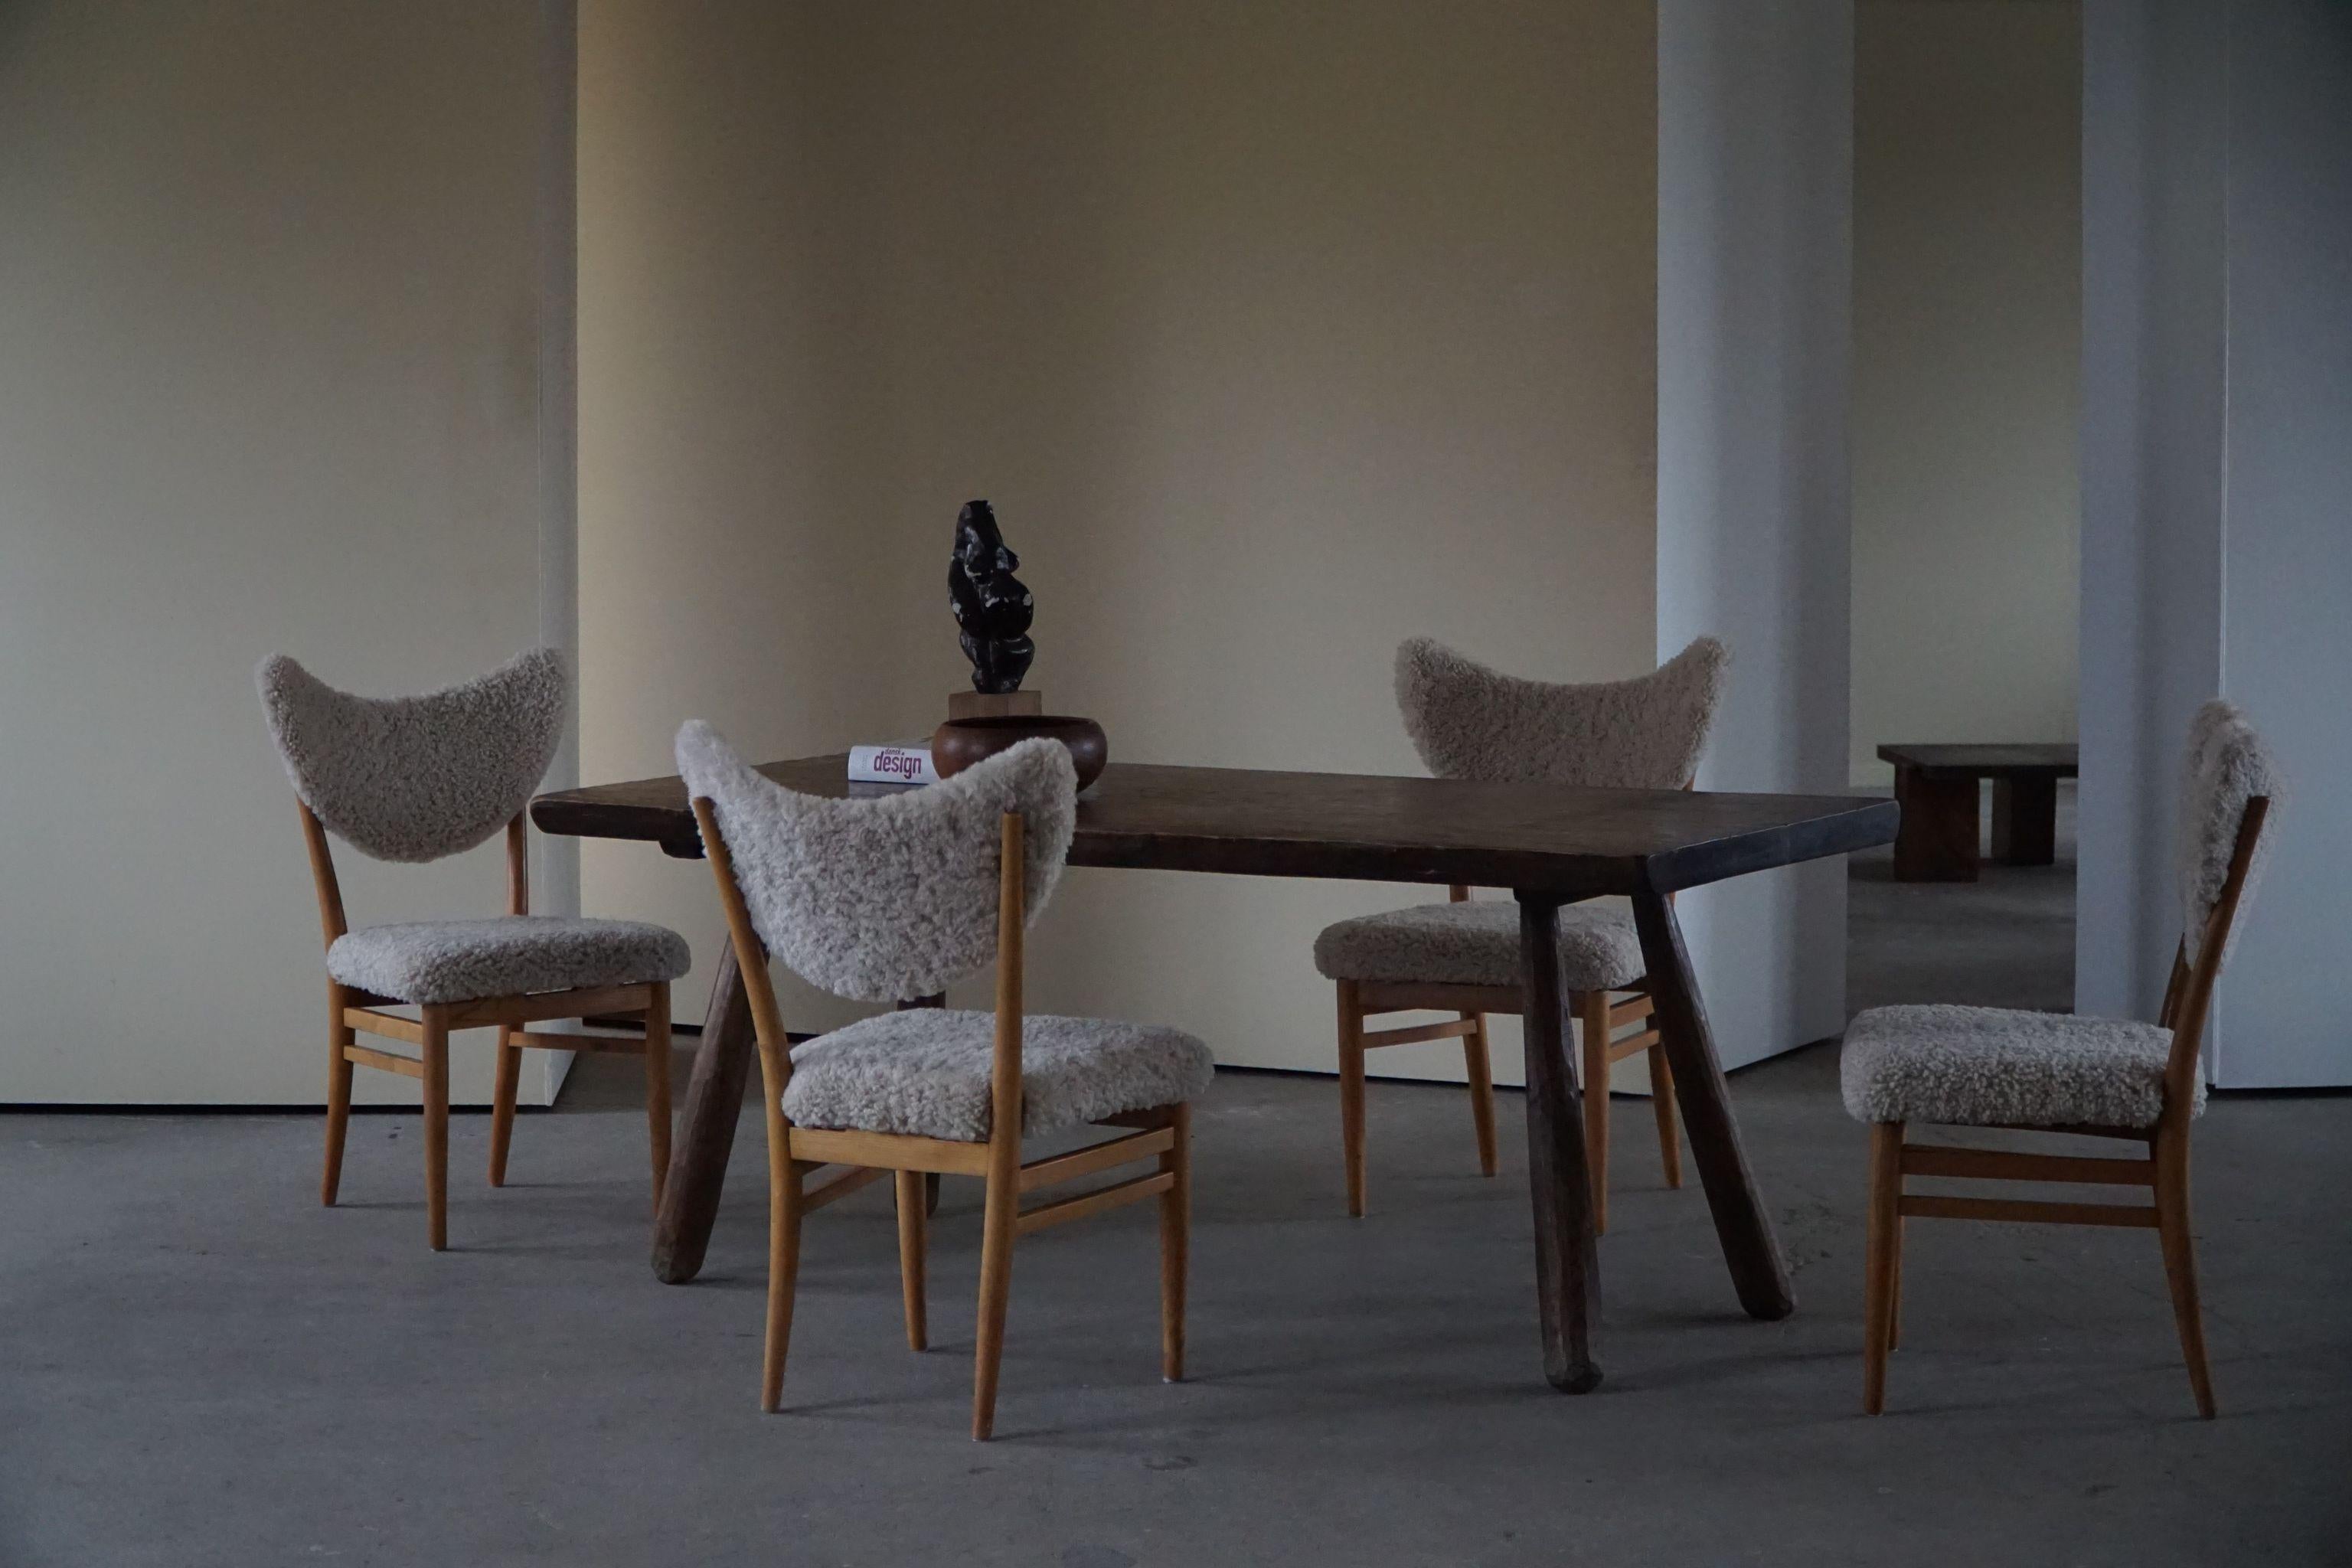 Hvidt & Mølgaard, Set of 4 Chairs in Ash, Reupholstered in Lambswool, 1950s For Sale 1